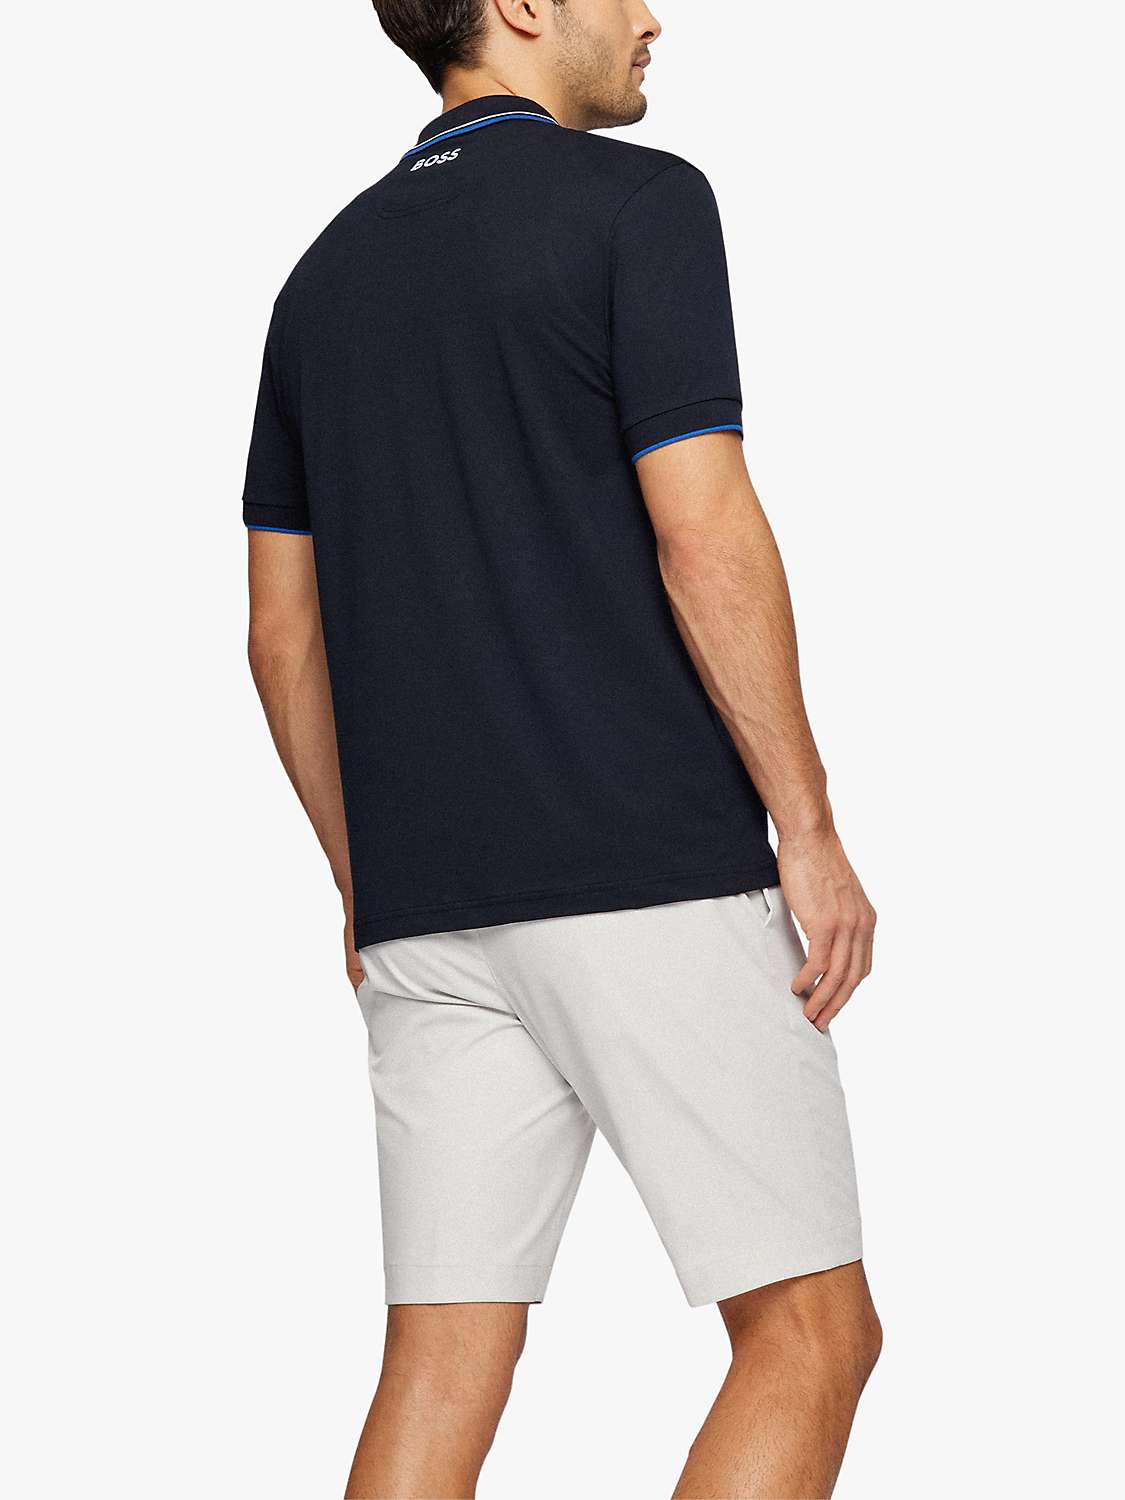 Buy BOSS Paddy Pro Short Sleeve Polo Top Online at johnlewis.com